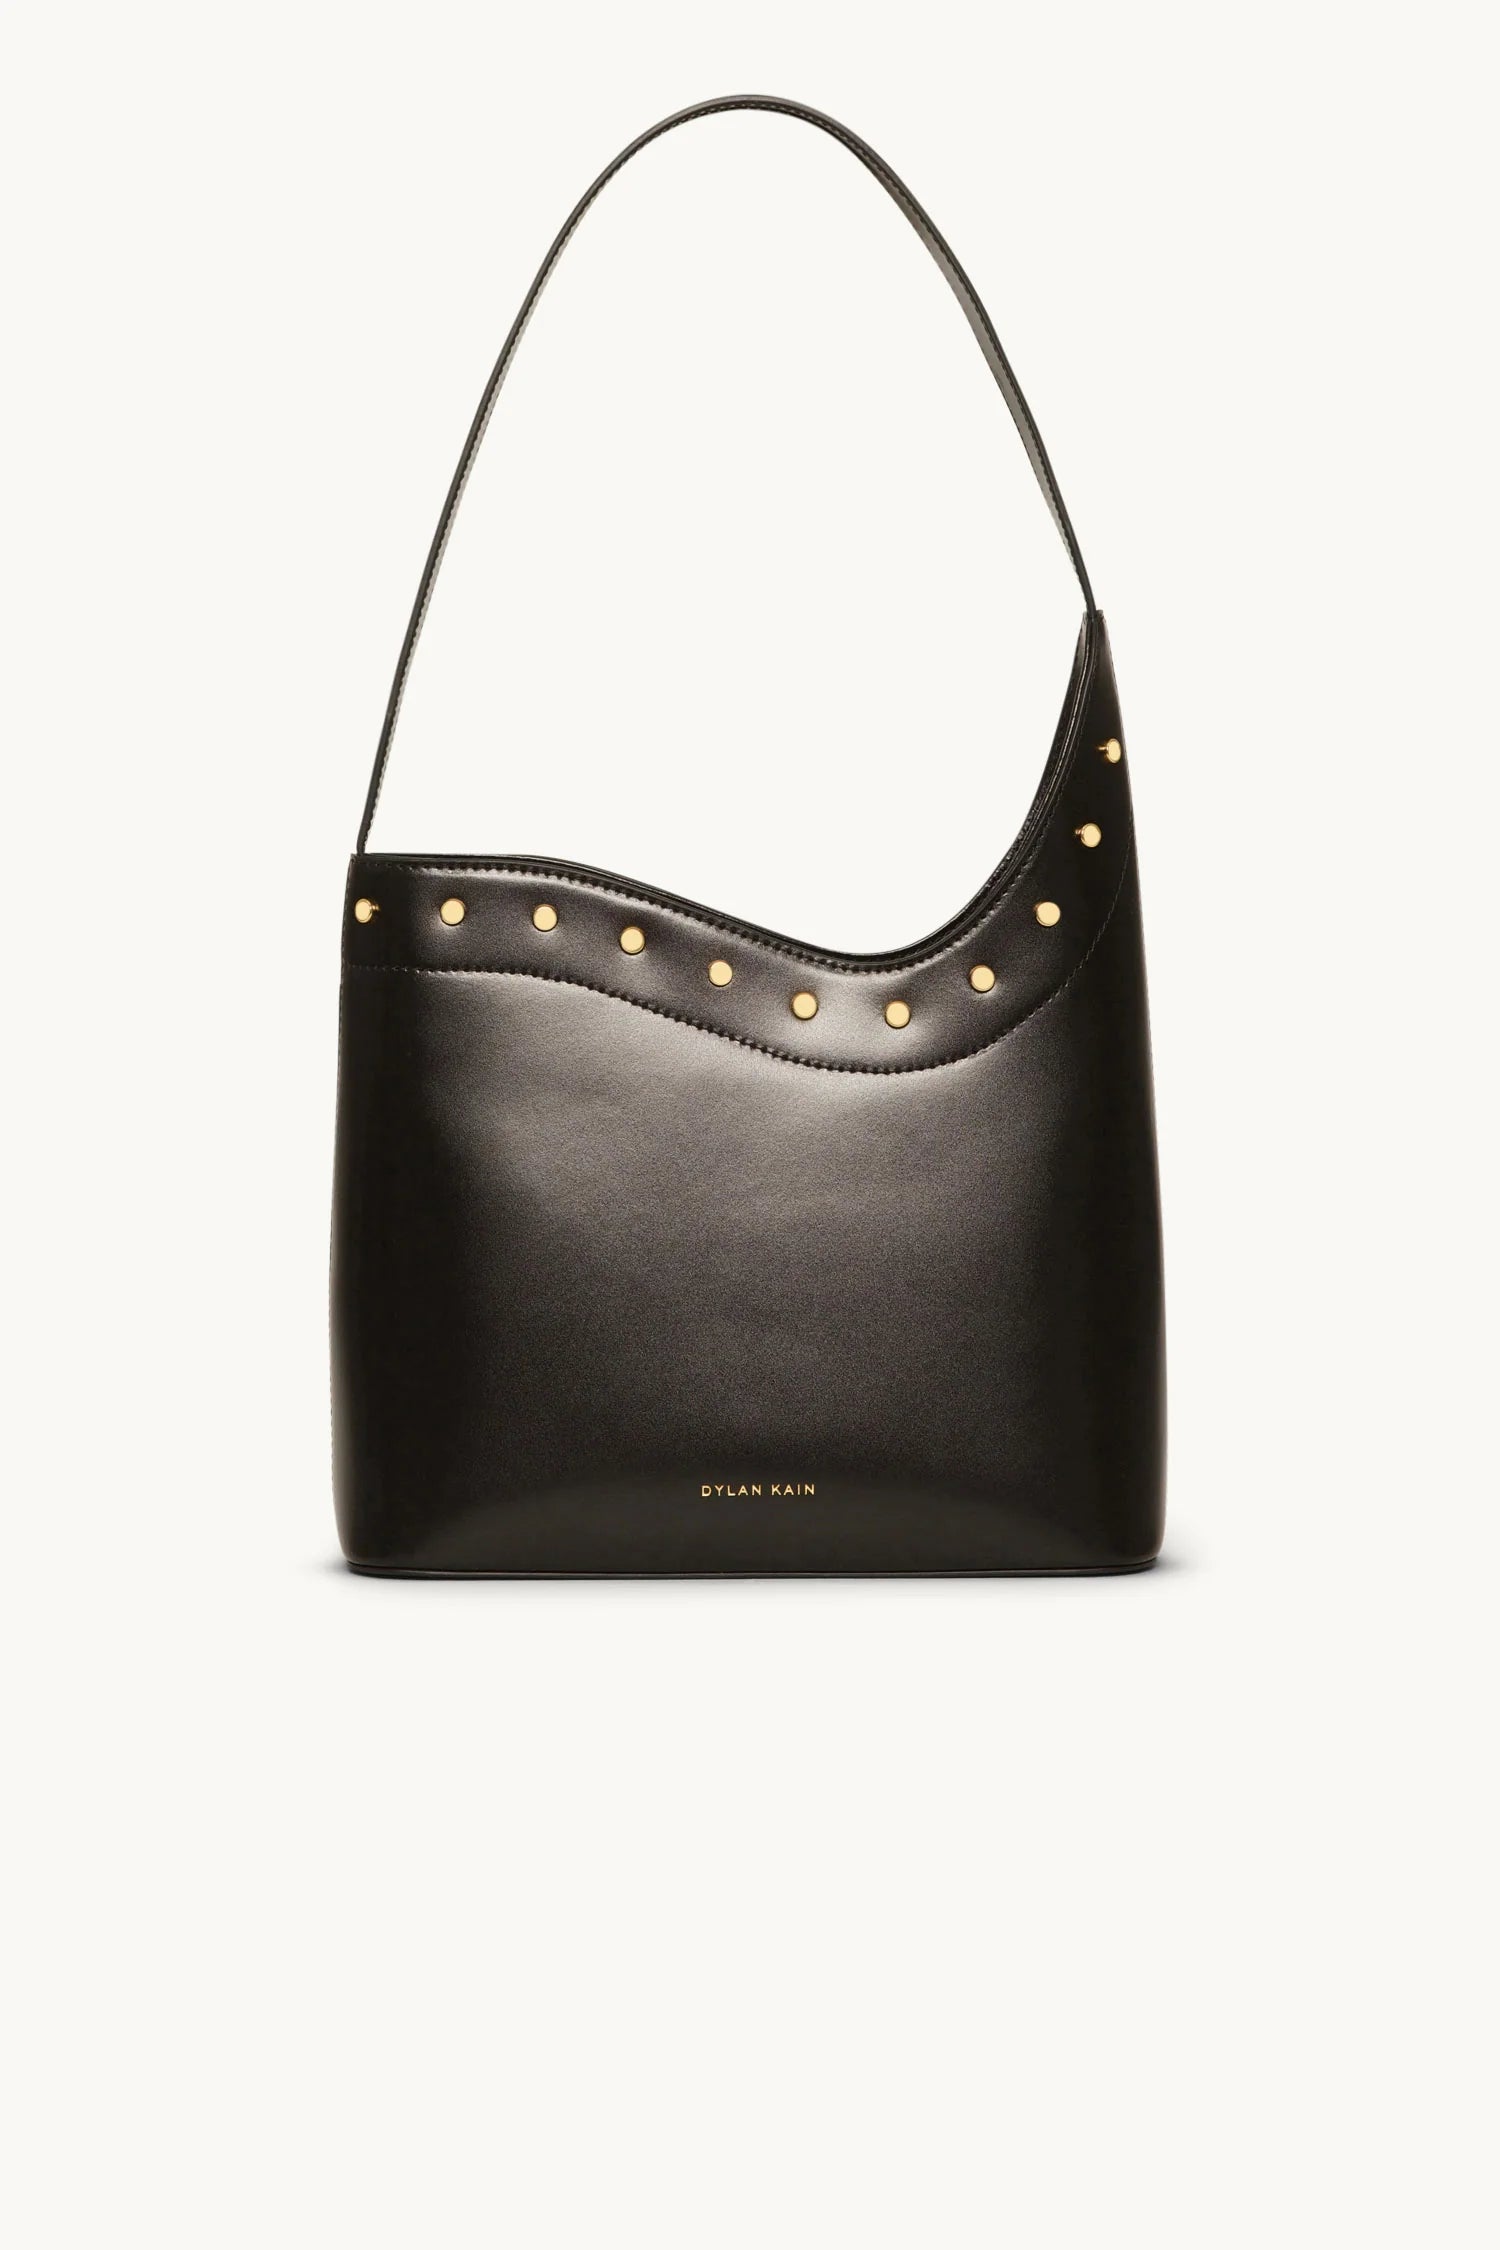 Dylan Kain | The Londyn Studded Bag - Warm Gold